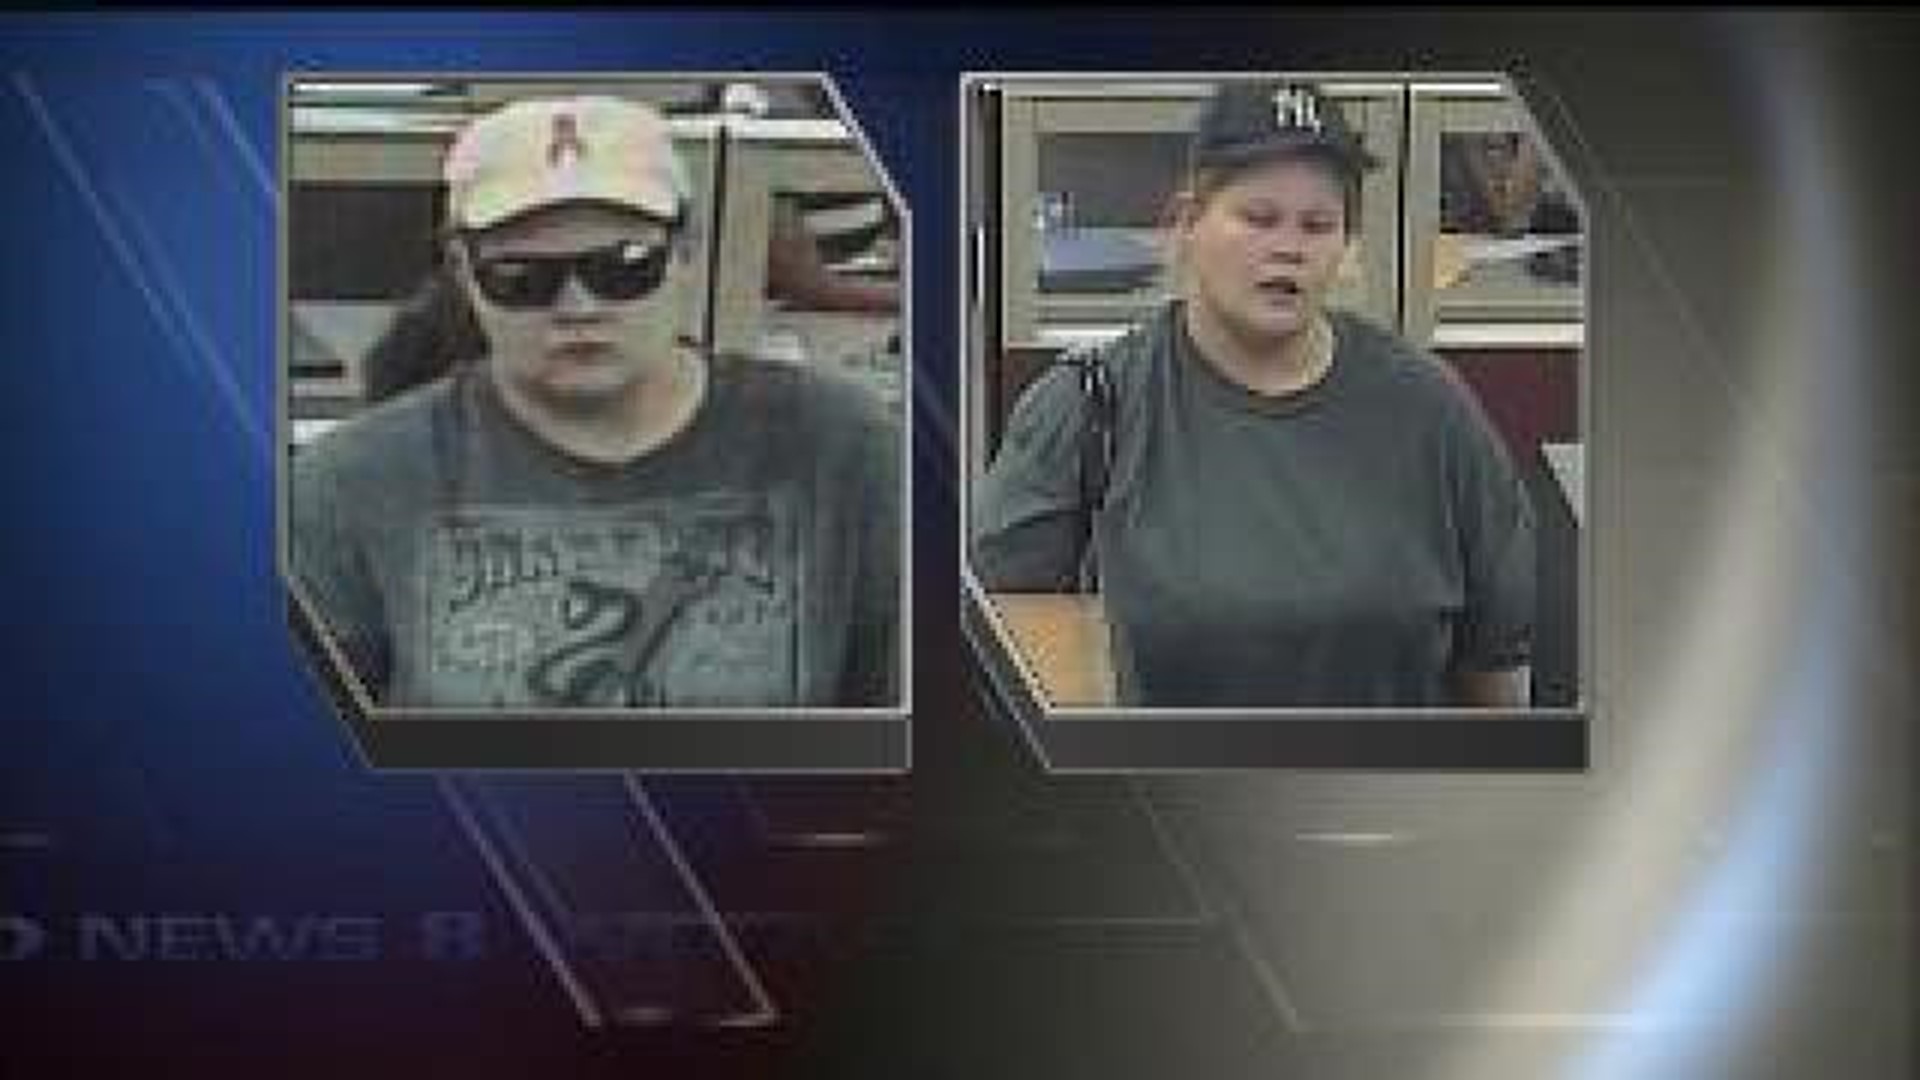 Police continue search for person responsible for robbing Davenport bank